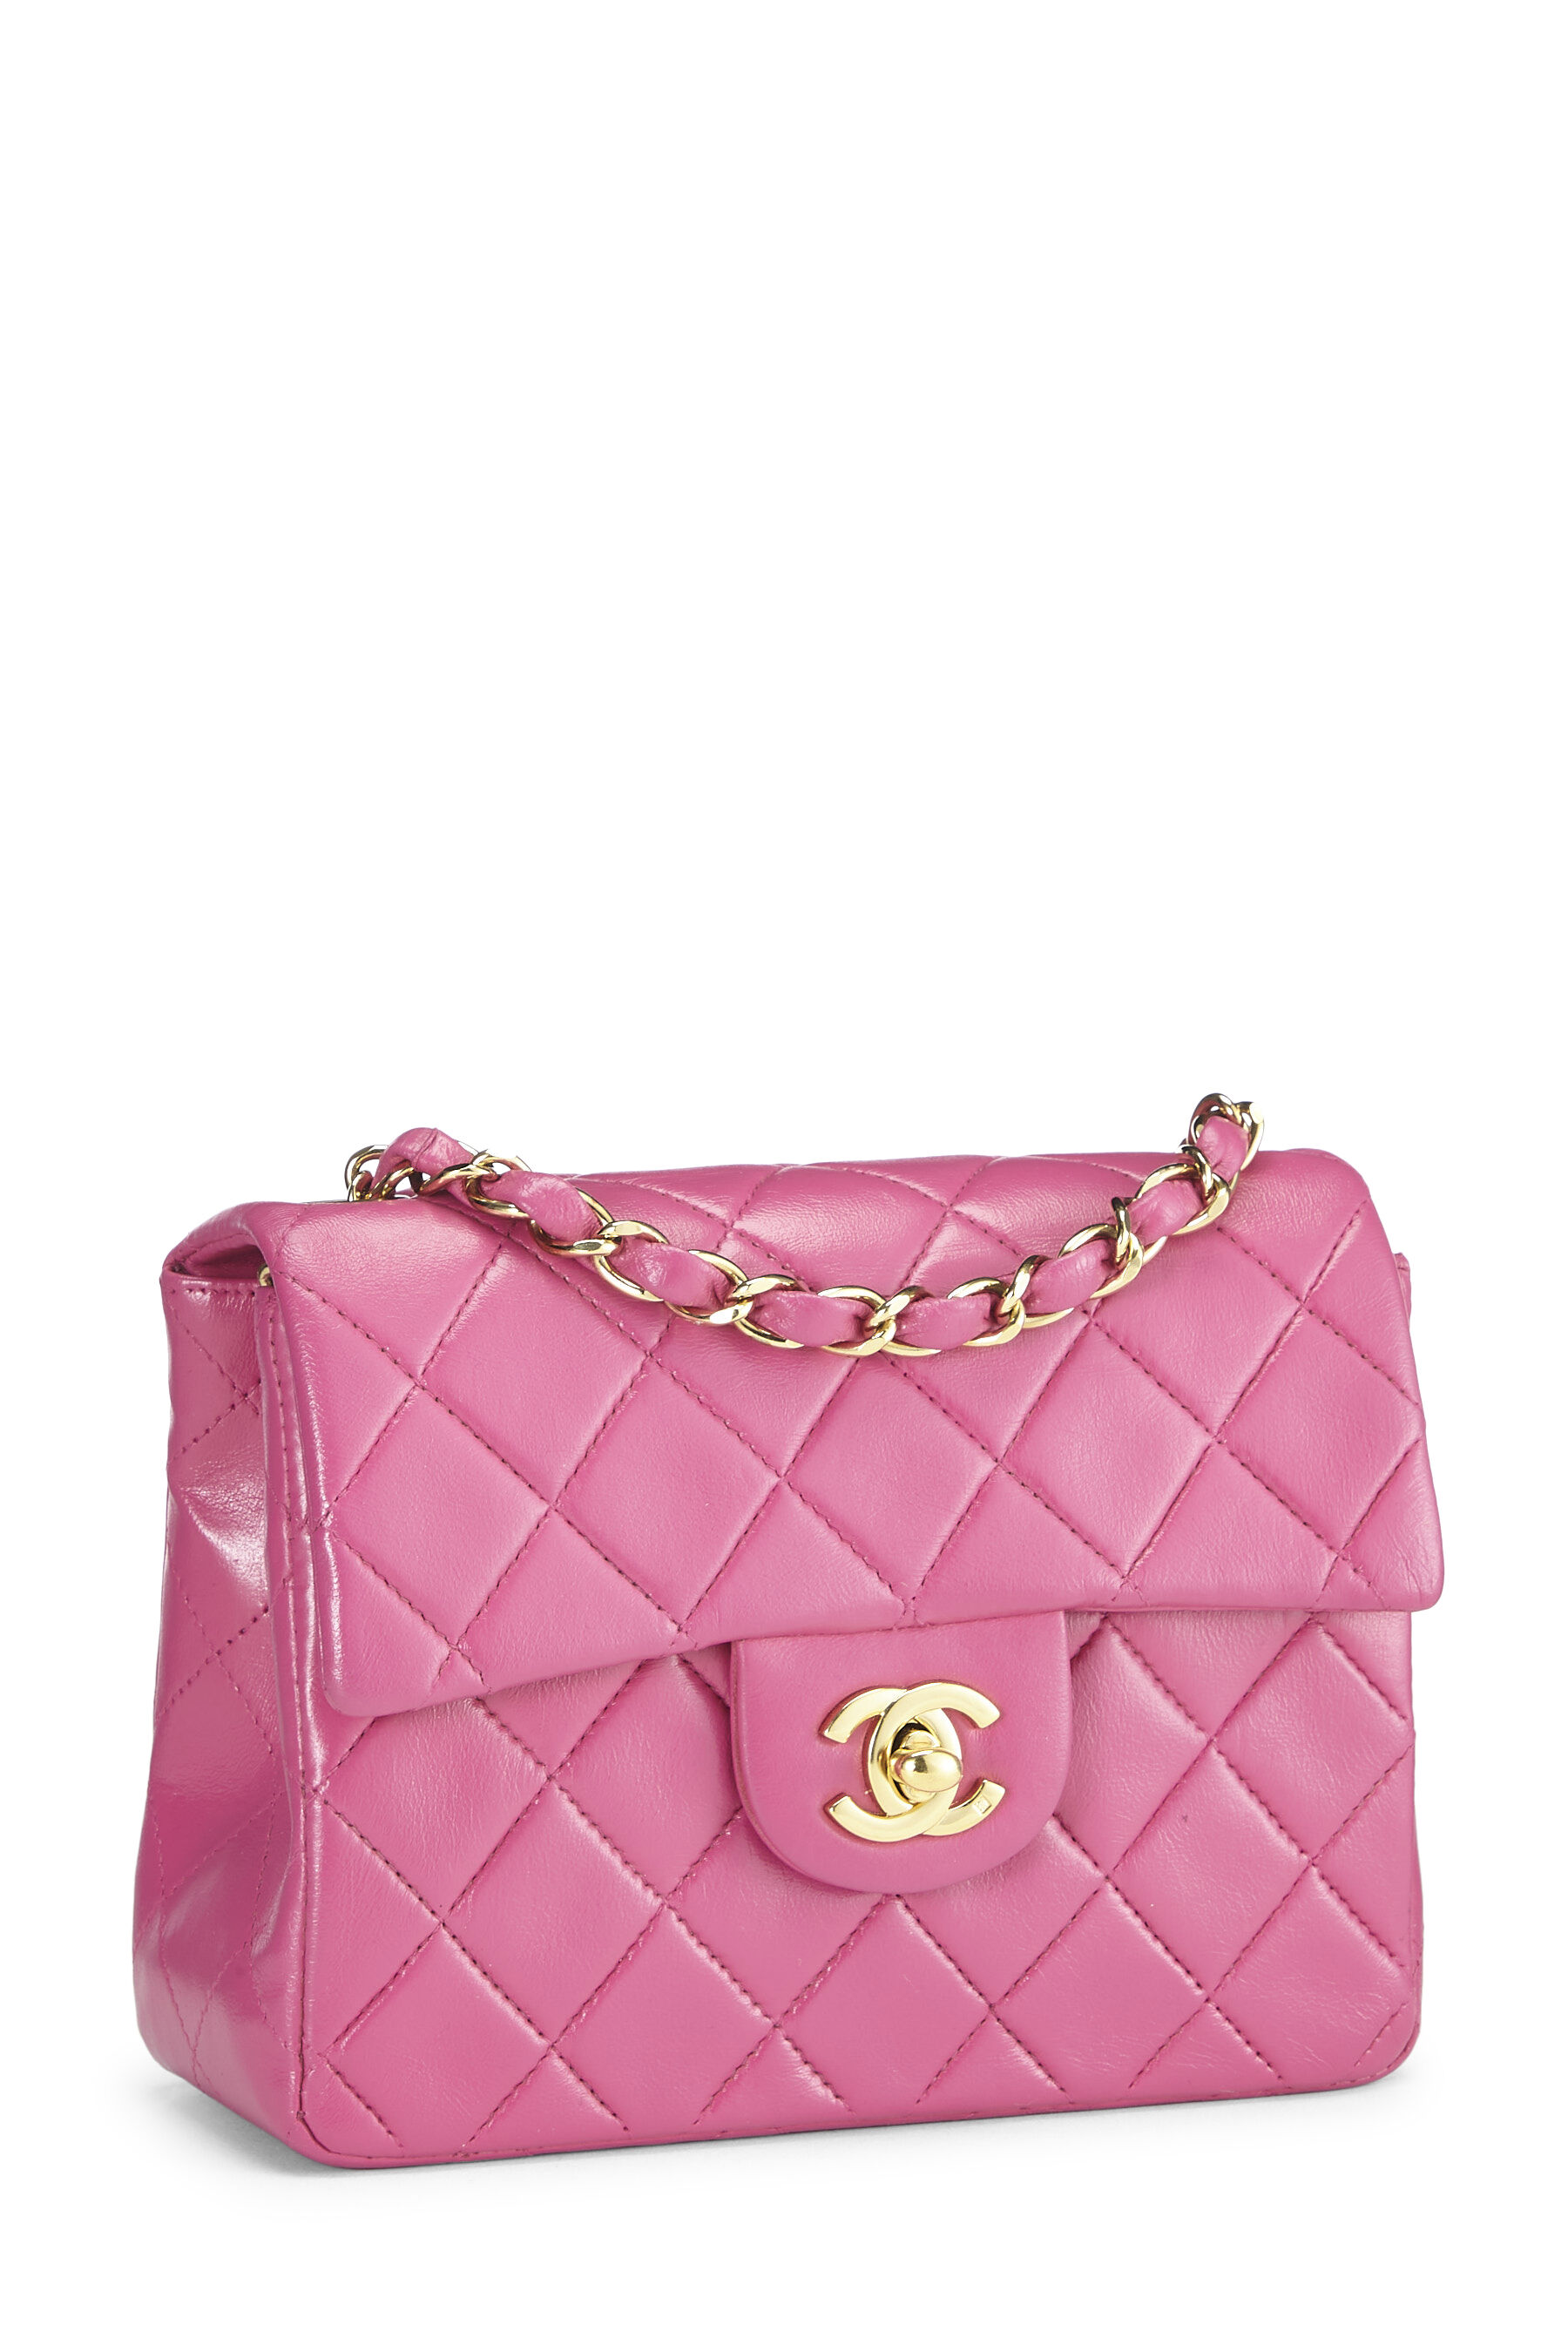 Chanel - Pink Quilted Lambskin Classic Square Flap Mini